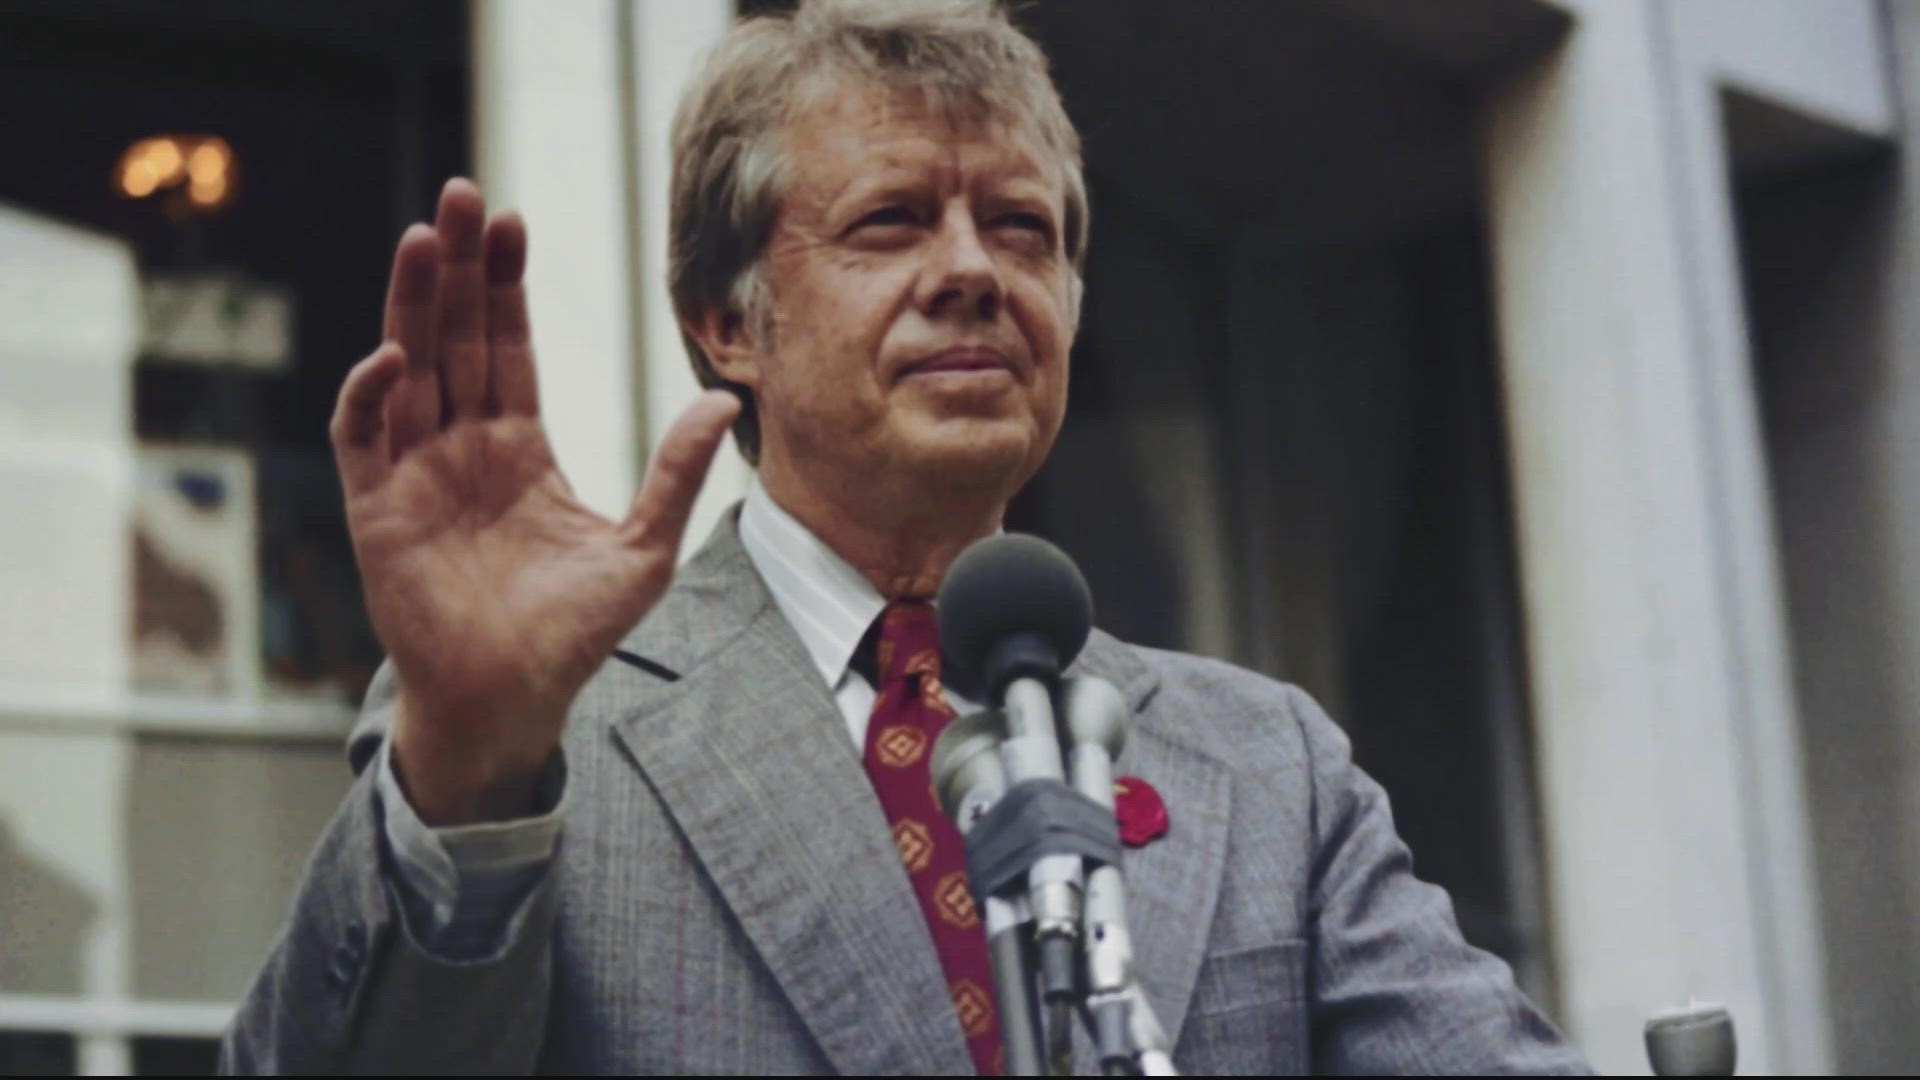 President Carter didn't drink when he was in office. But check in with any local brewery and you're likely to hear a brew master toasting a part of his legacy.